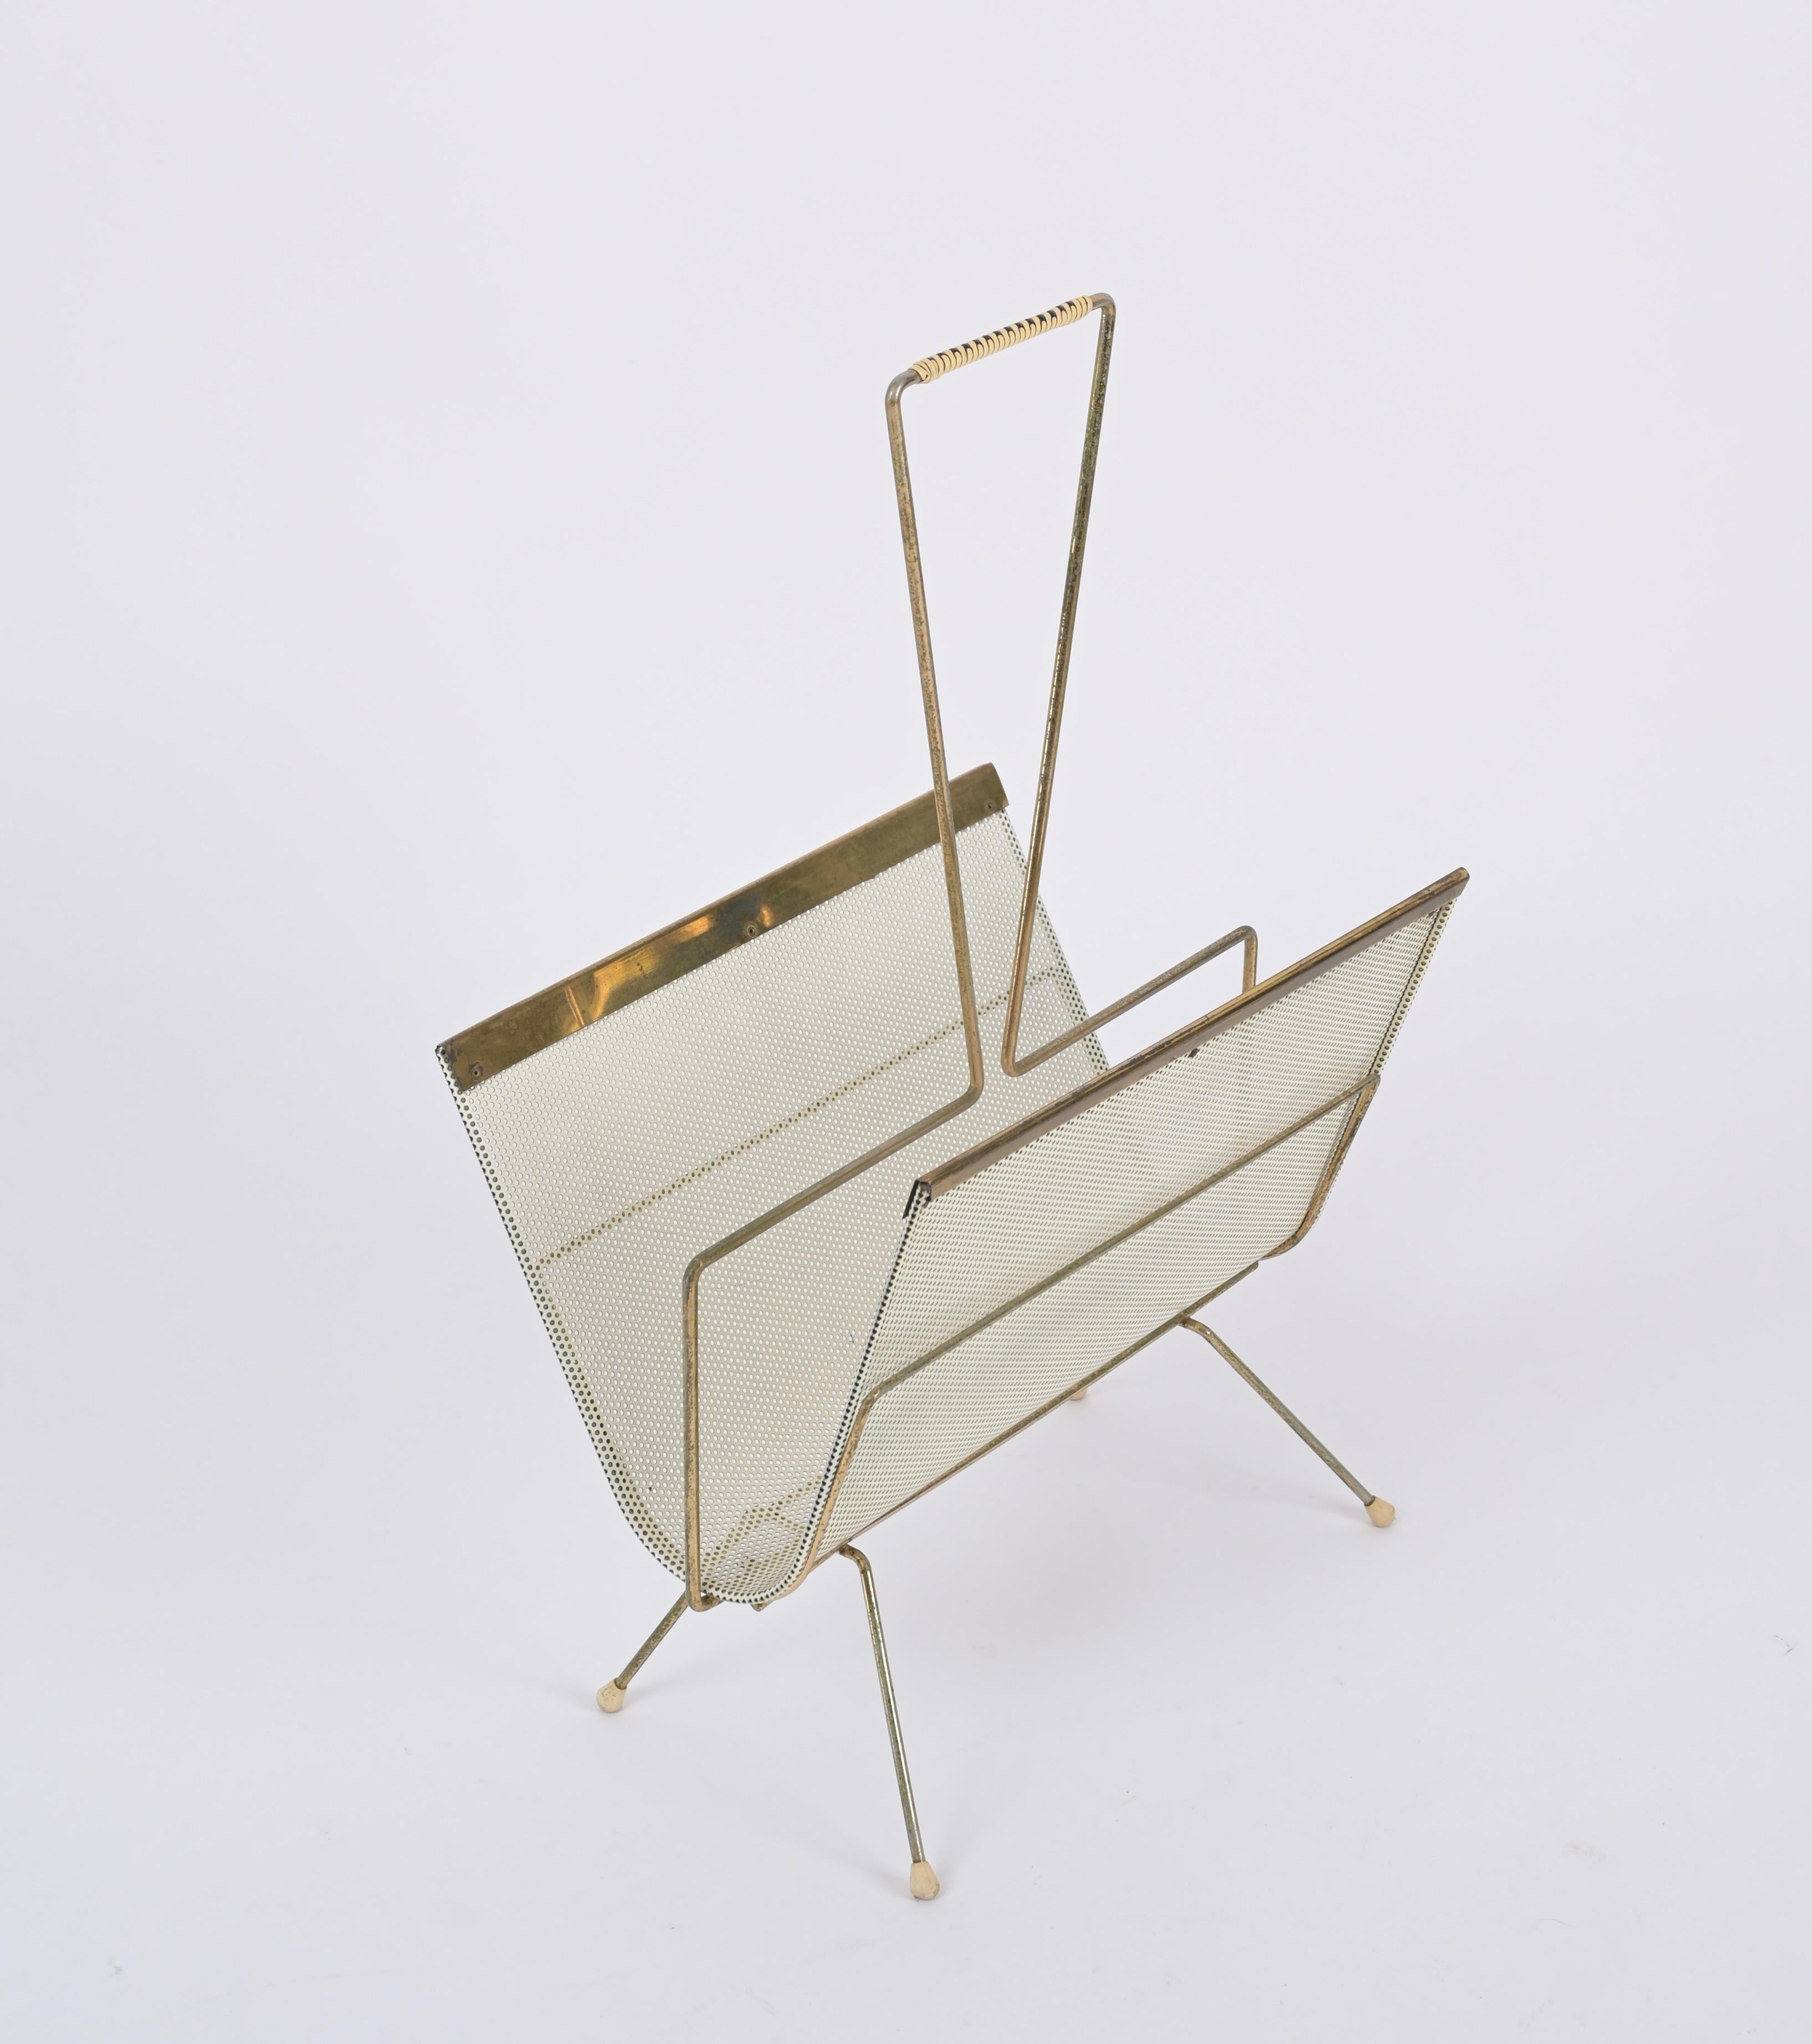 Enameled Mathieu Matégot Magazine Rack, Brass and Perforated Ivory Iron, France 1950s For Sale